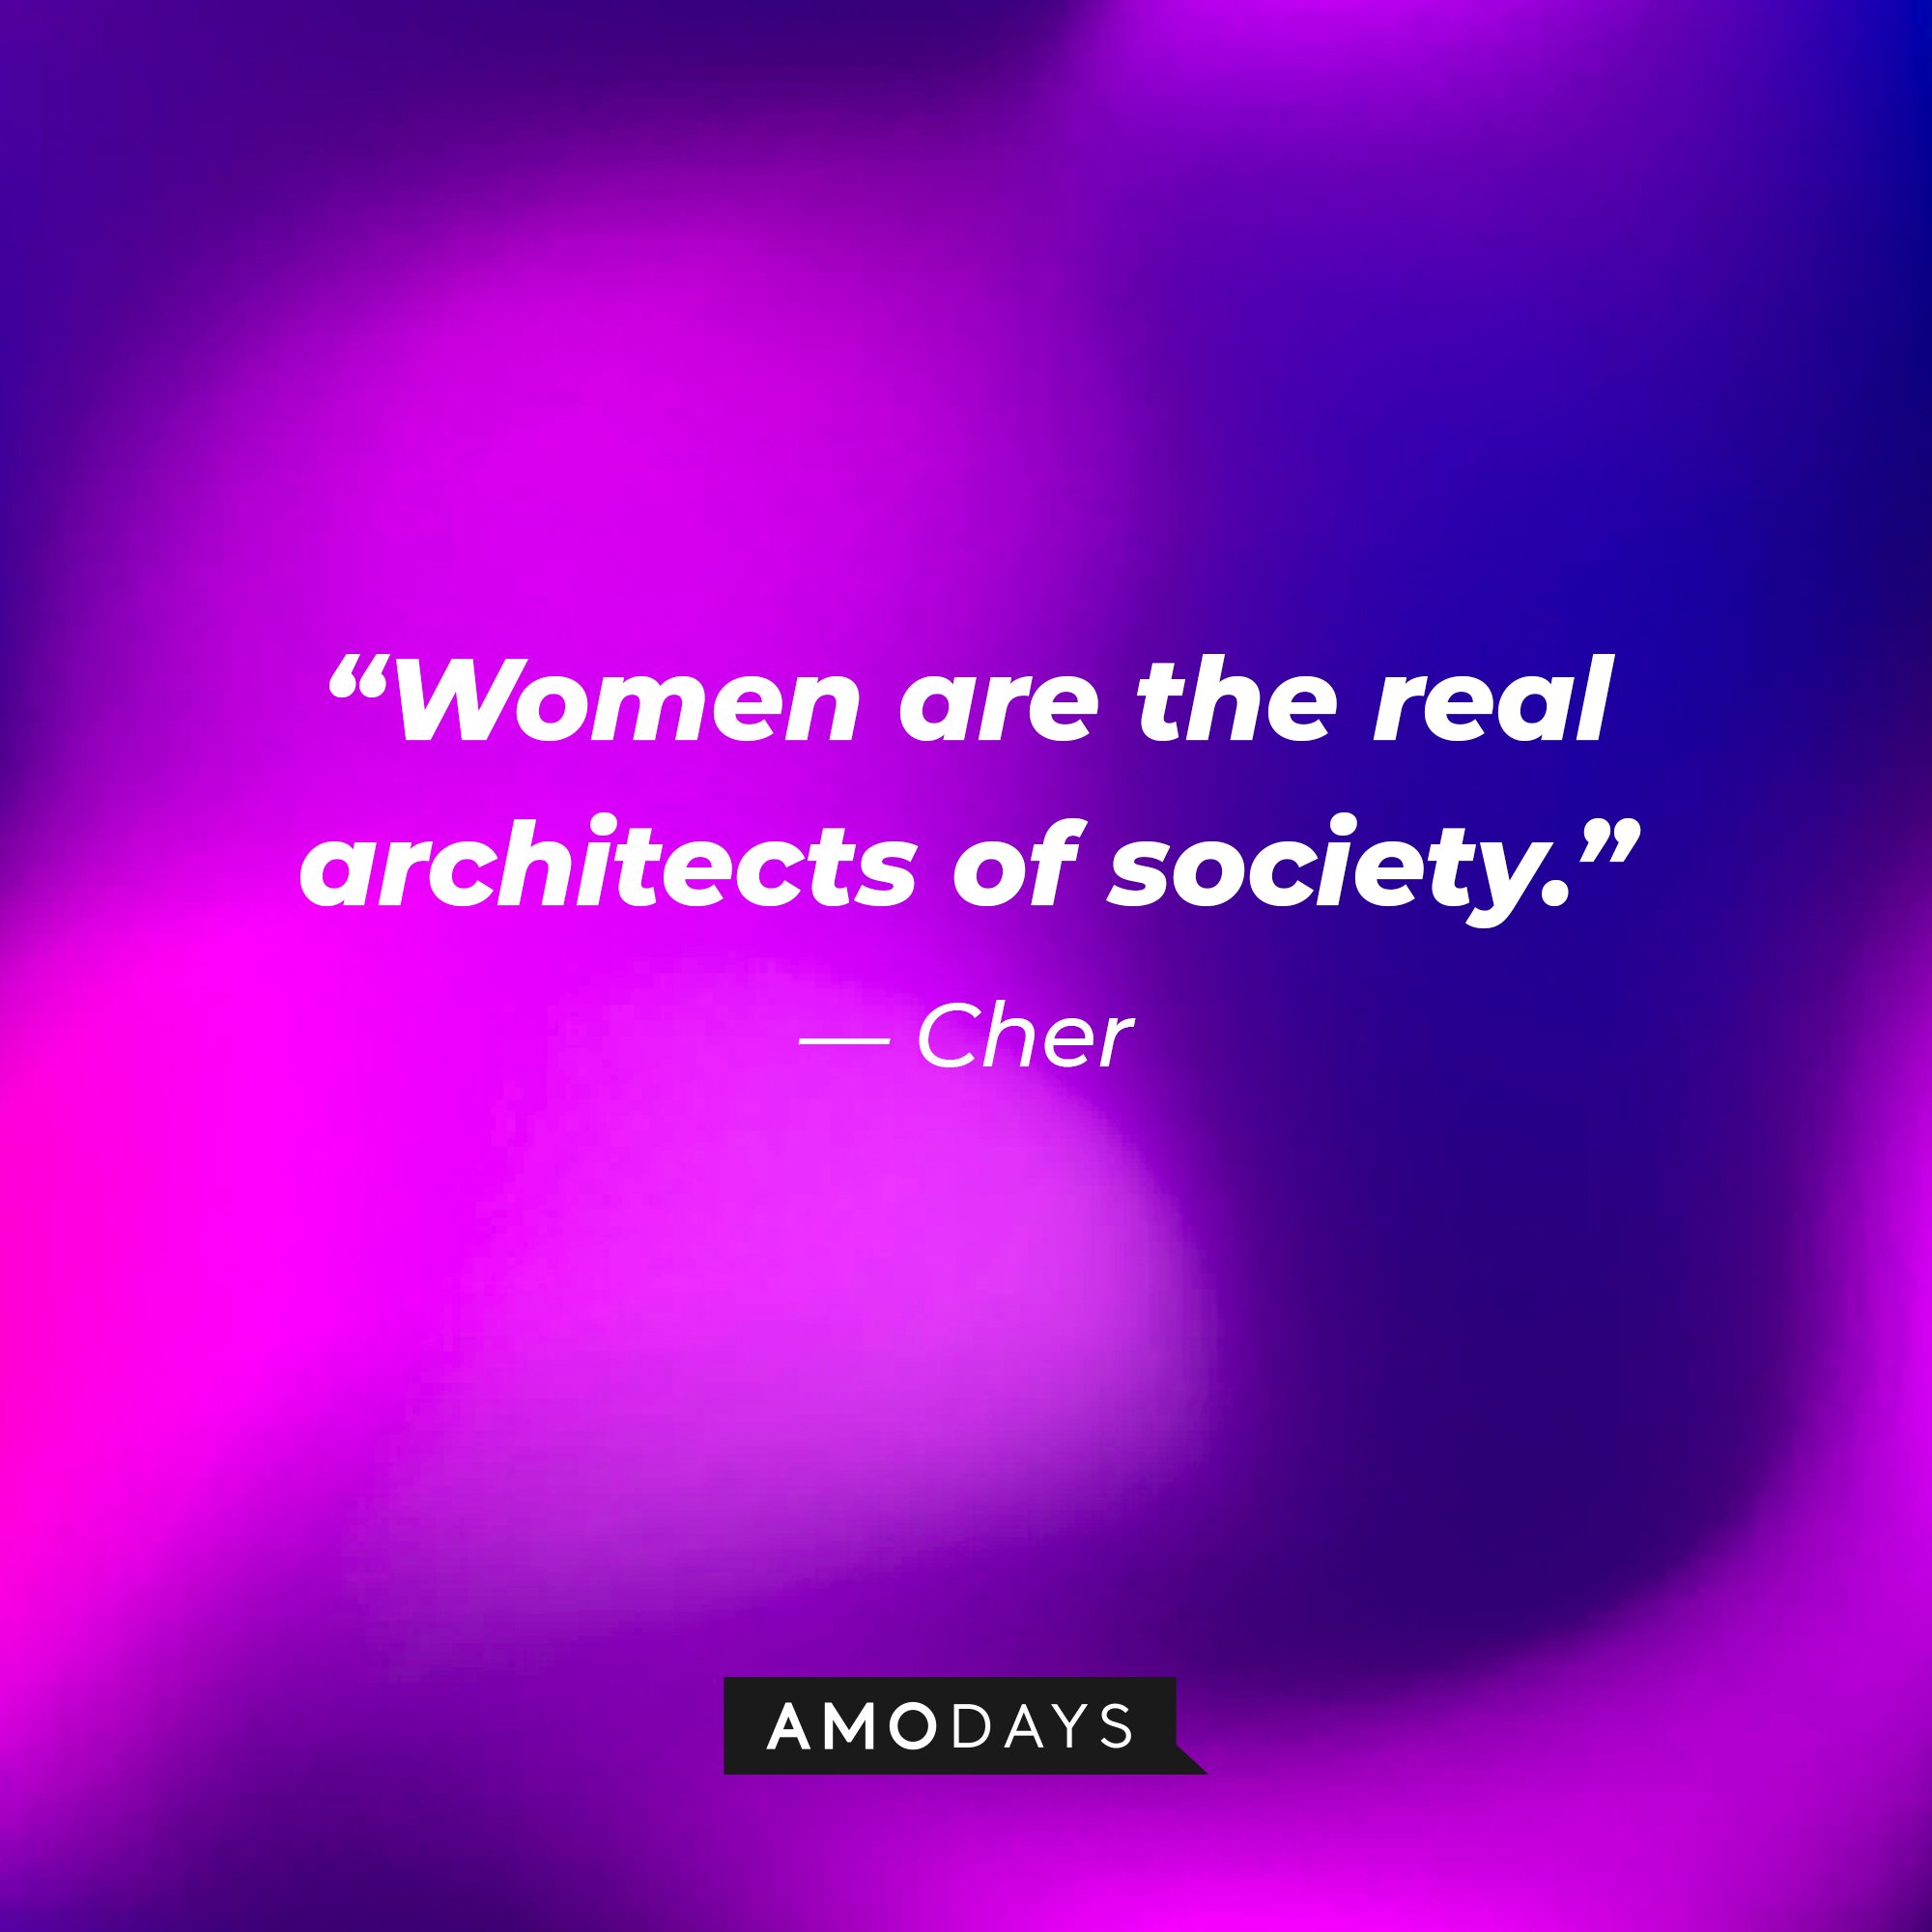 Cher’s quote: “Women are the real architects of society.” | Image: AmoDays